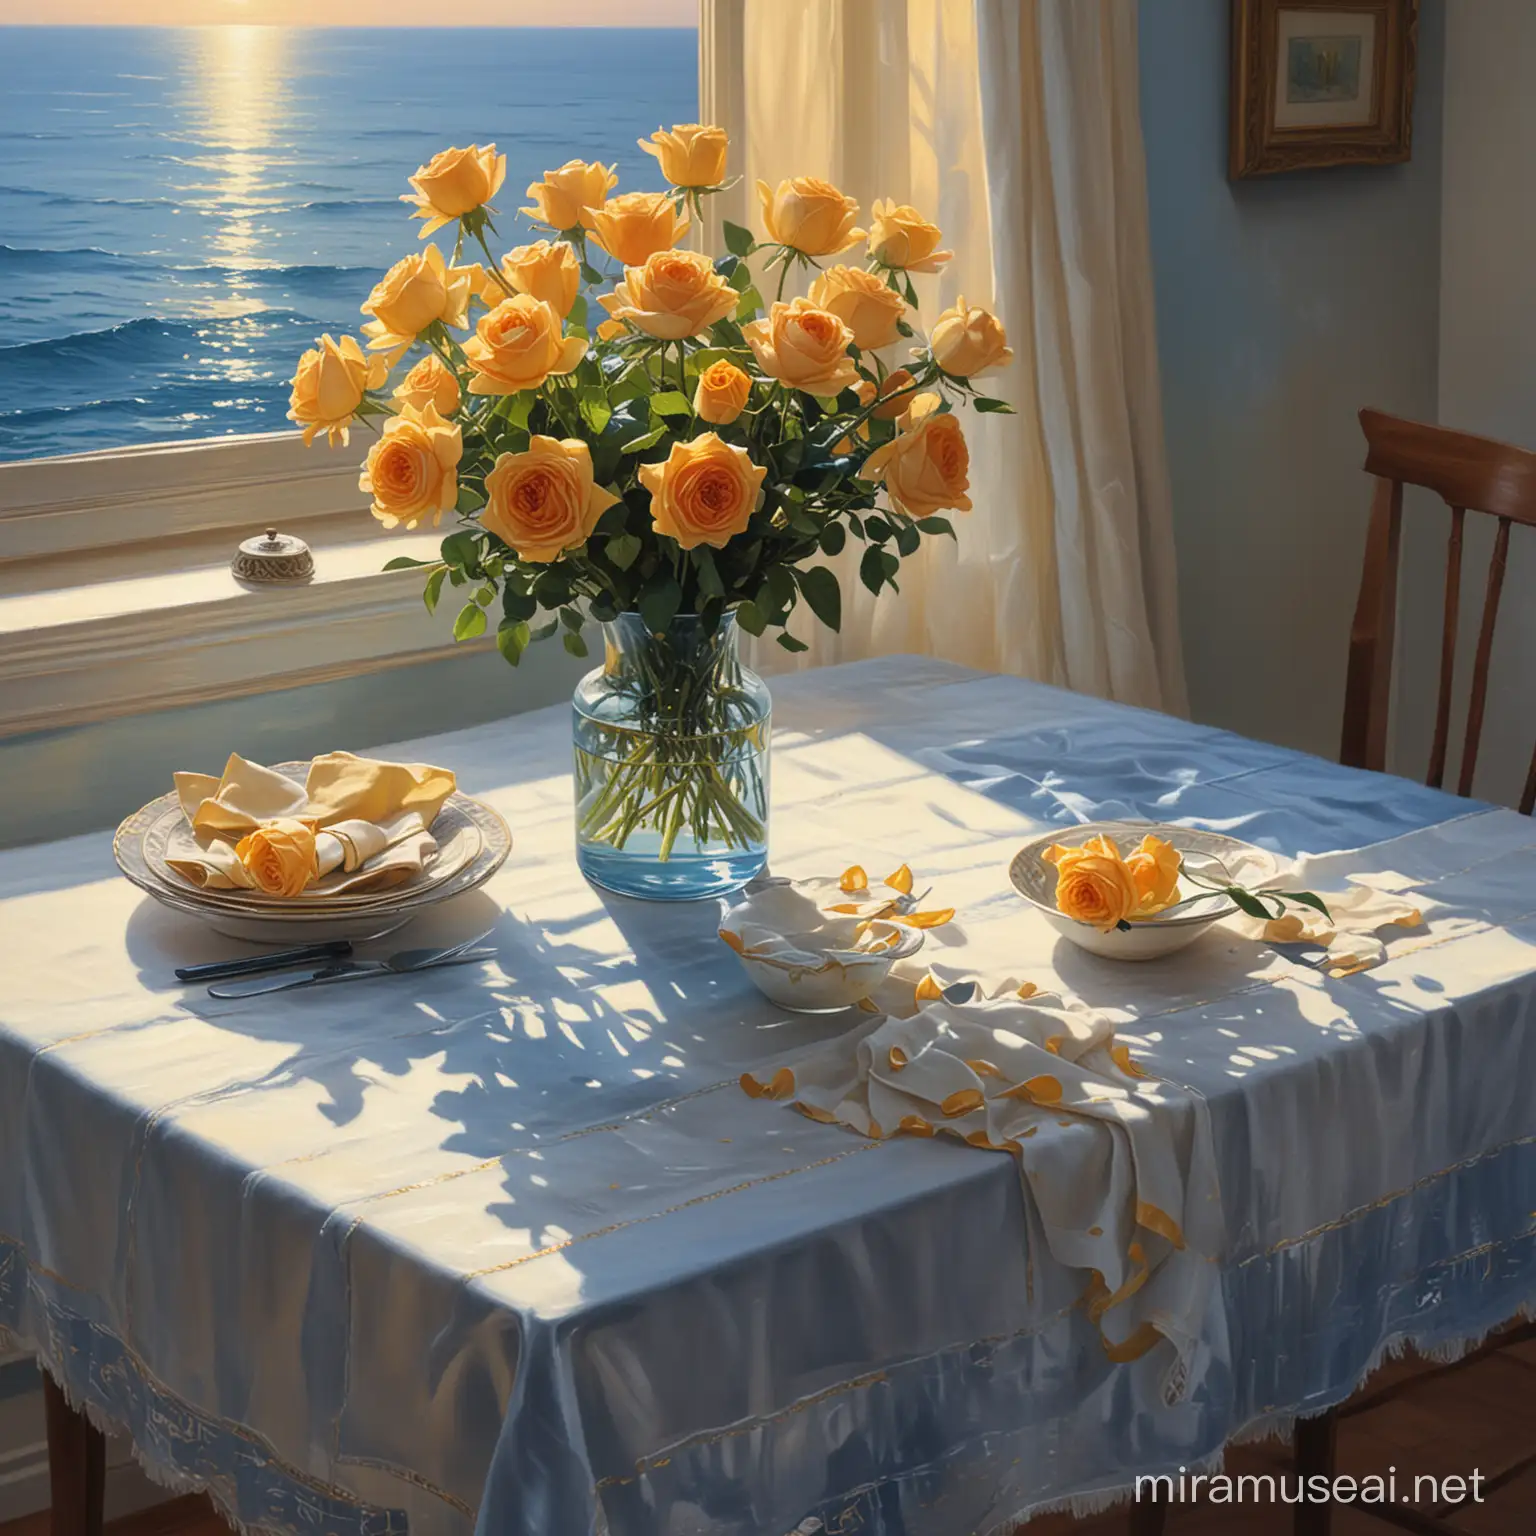 In this oil painting, the deep blue sea is set against the lingering glow of the setting sun. The distant sky adopts a golden hue, with the sun's rays gently reflecting upon the tranquil waters, resembling a golden ribbon delicately caressing the surface. In the foreground, a table sits quietly at the center of the composition, bathed in the radiant glow reminiscent of the diffraction effect, emitting a dazzling light. On the table, there sits a transparent vase, holding a few roses immersed in water, their petals casting soft reflections. A gentle breeze sweeps through, softly ruffling the tablecloth, creating an atmosphere of lightness. The overall tone of the artwork is dominated by deep blue, evoking a sense of tranquility and mystery.